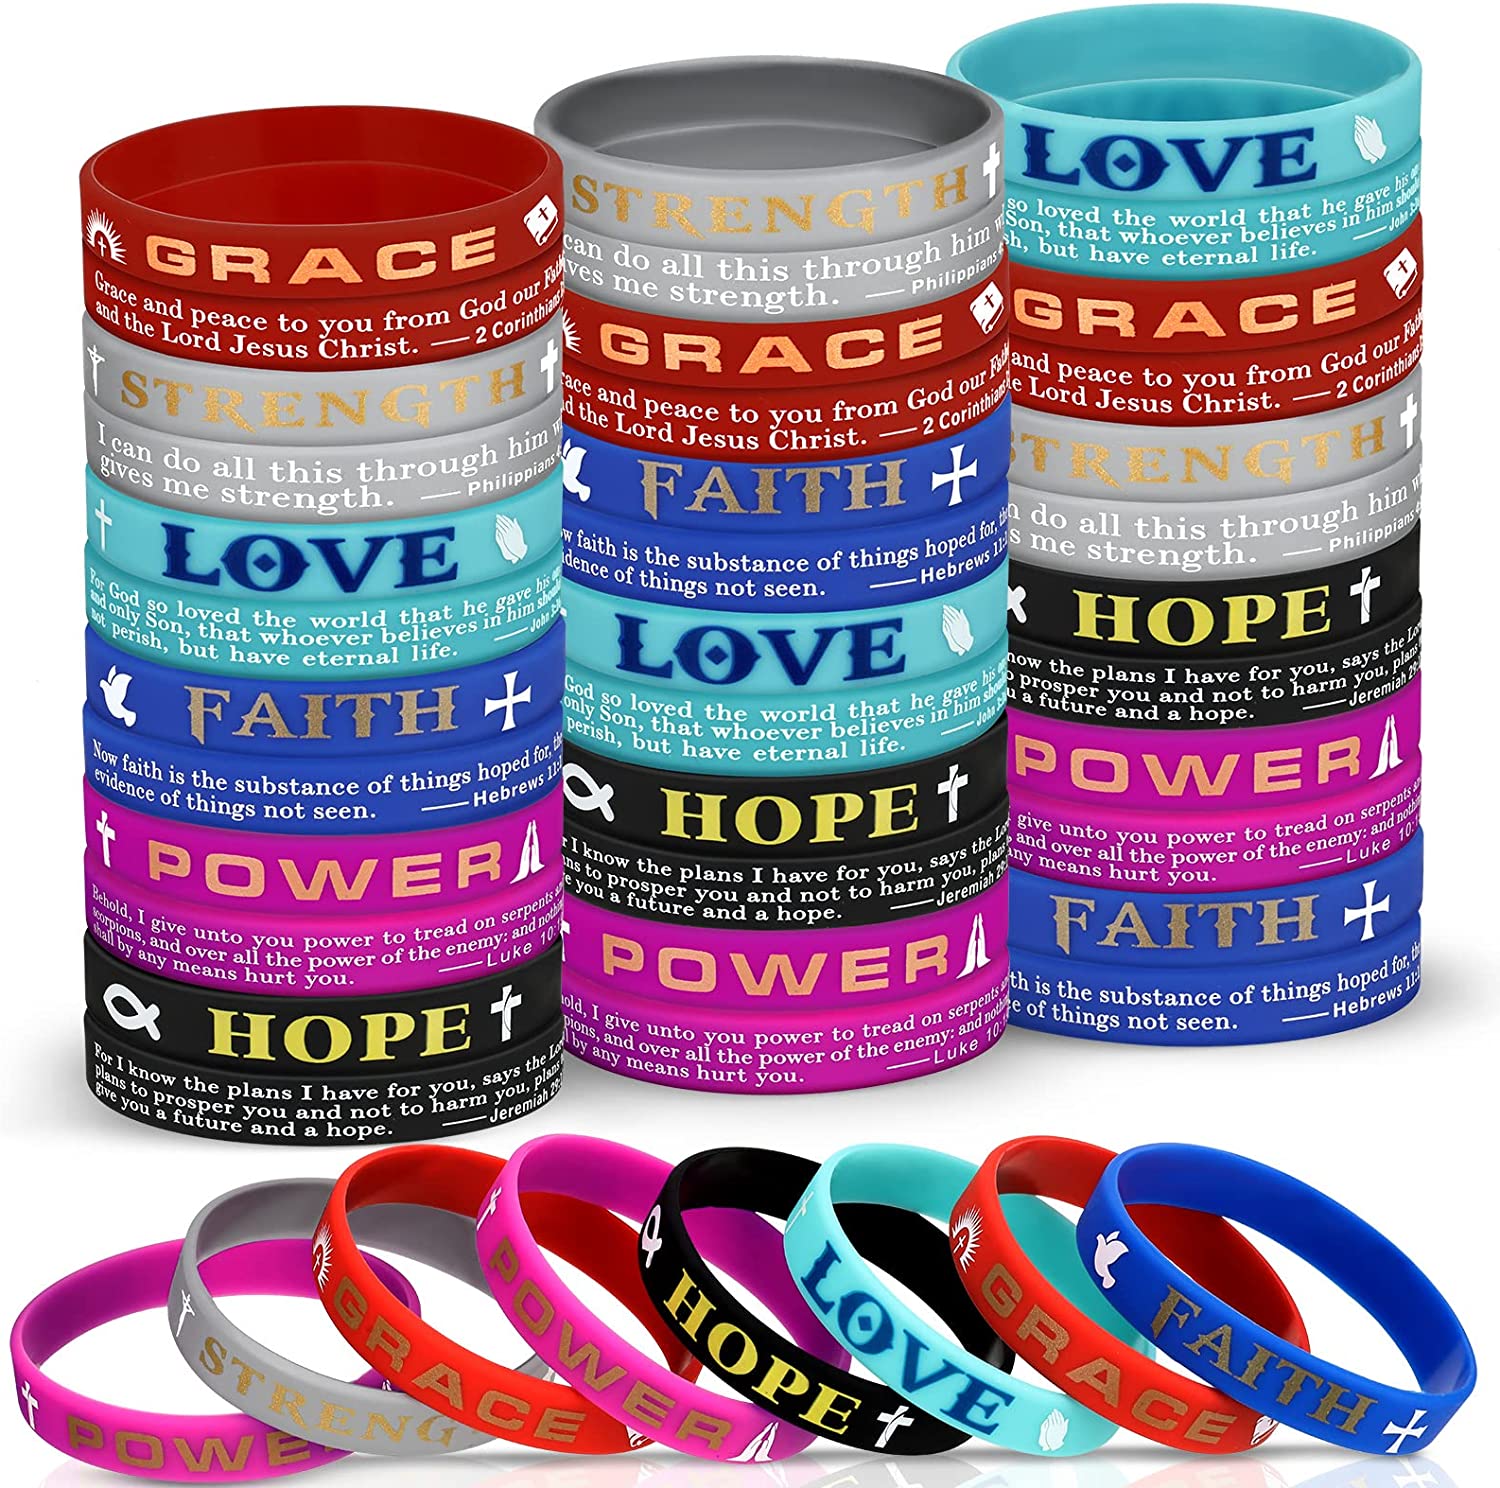 Amazon.com: 60 Pieces Religious Sayings Rubber Bracelet Silicone Christian  Bracelets Wristbands for Kids Religious Gifts() : Toys & Games